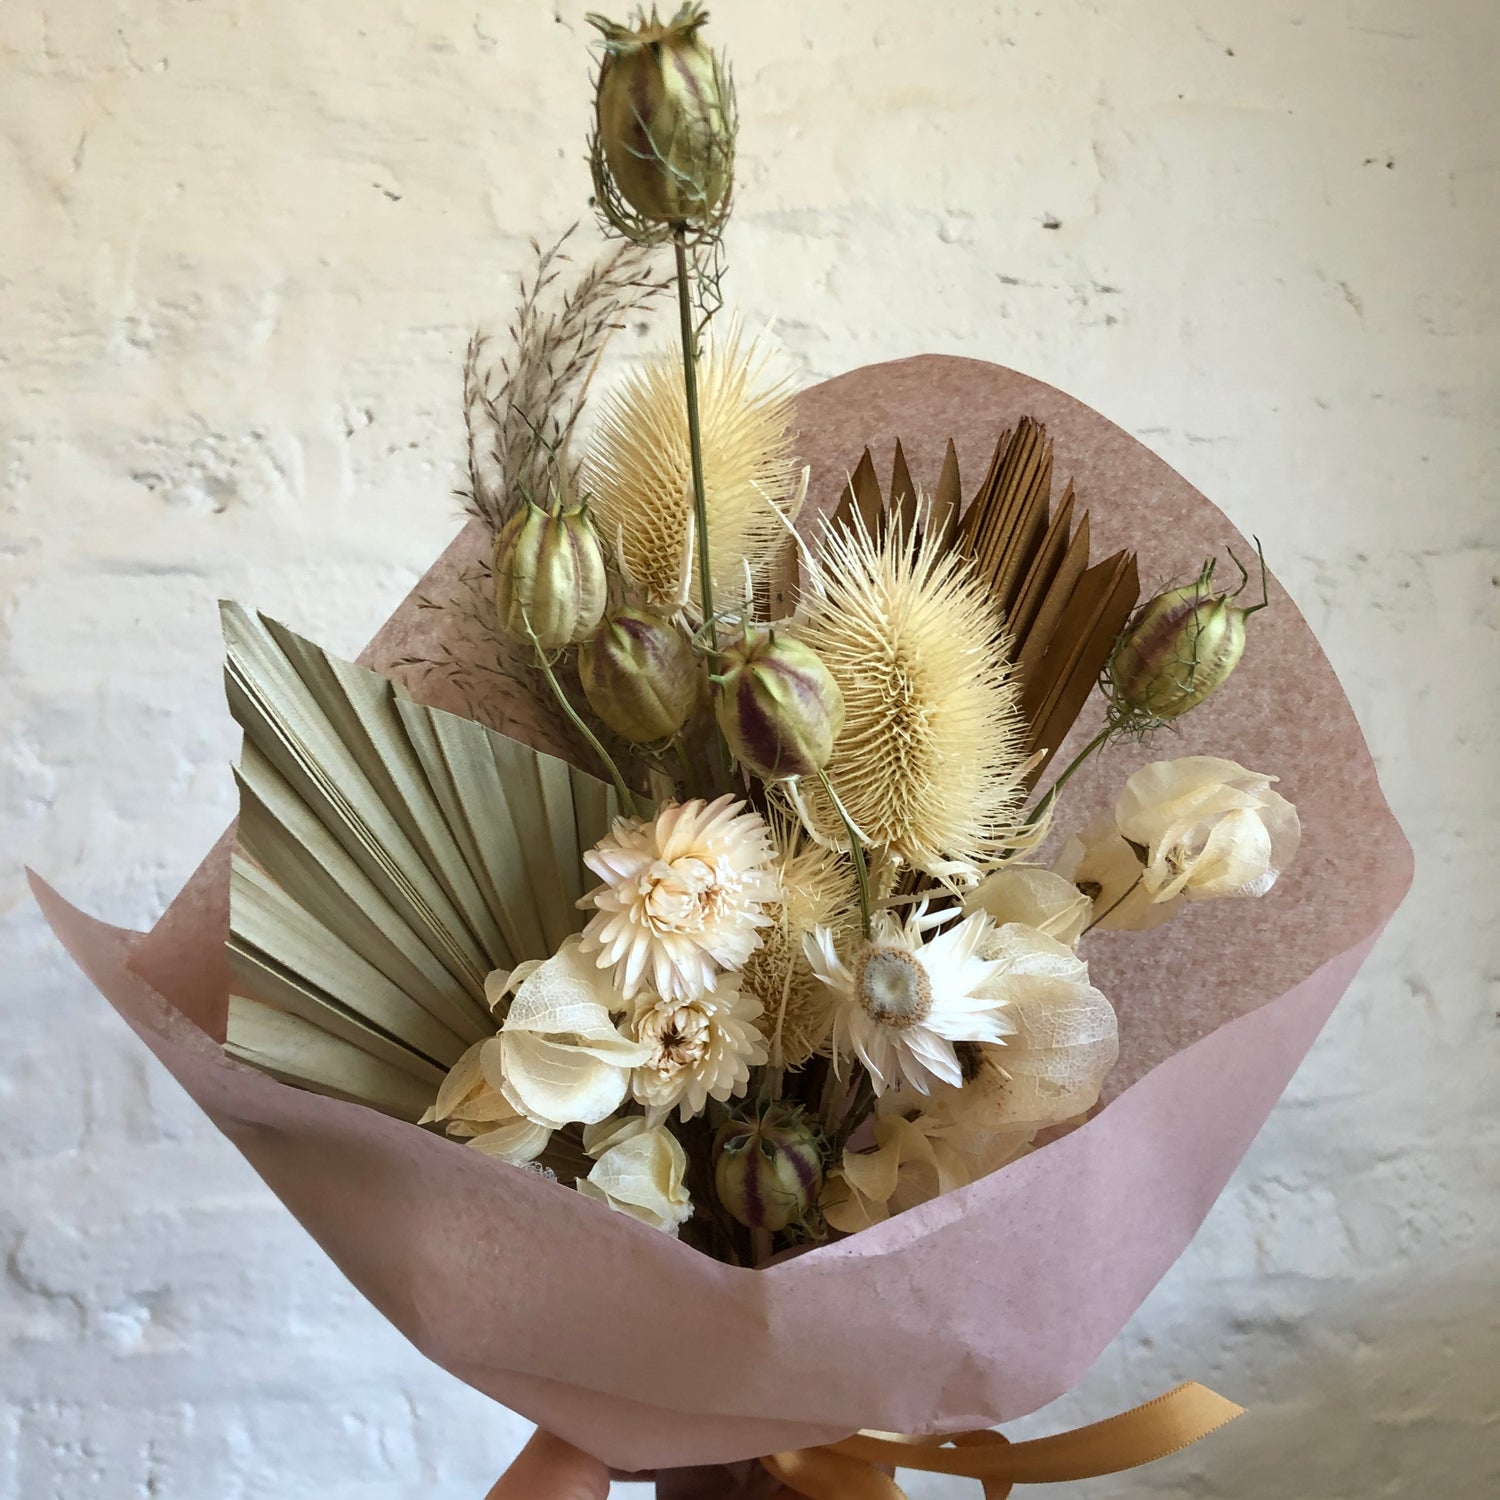 Dried Flowers Bouquet Natural Dried Flowers Dried Real Natural